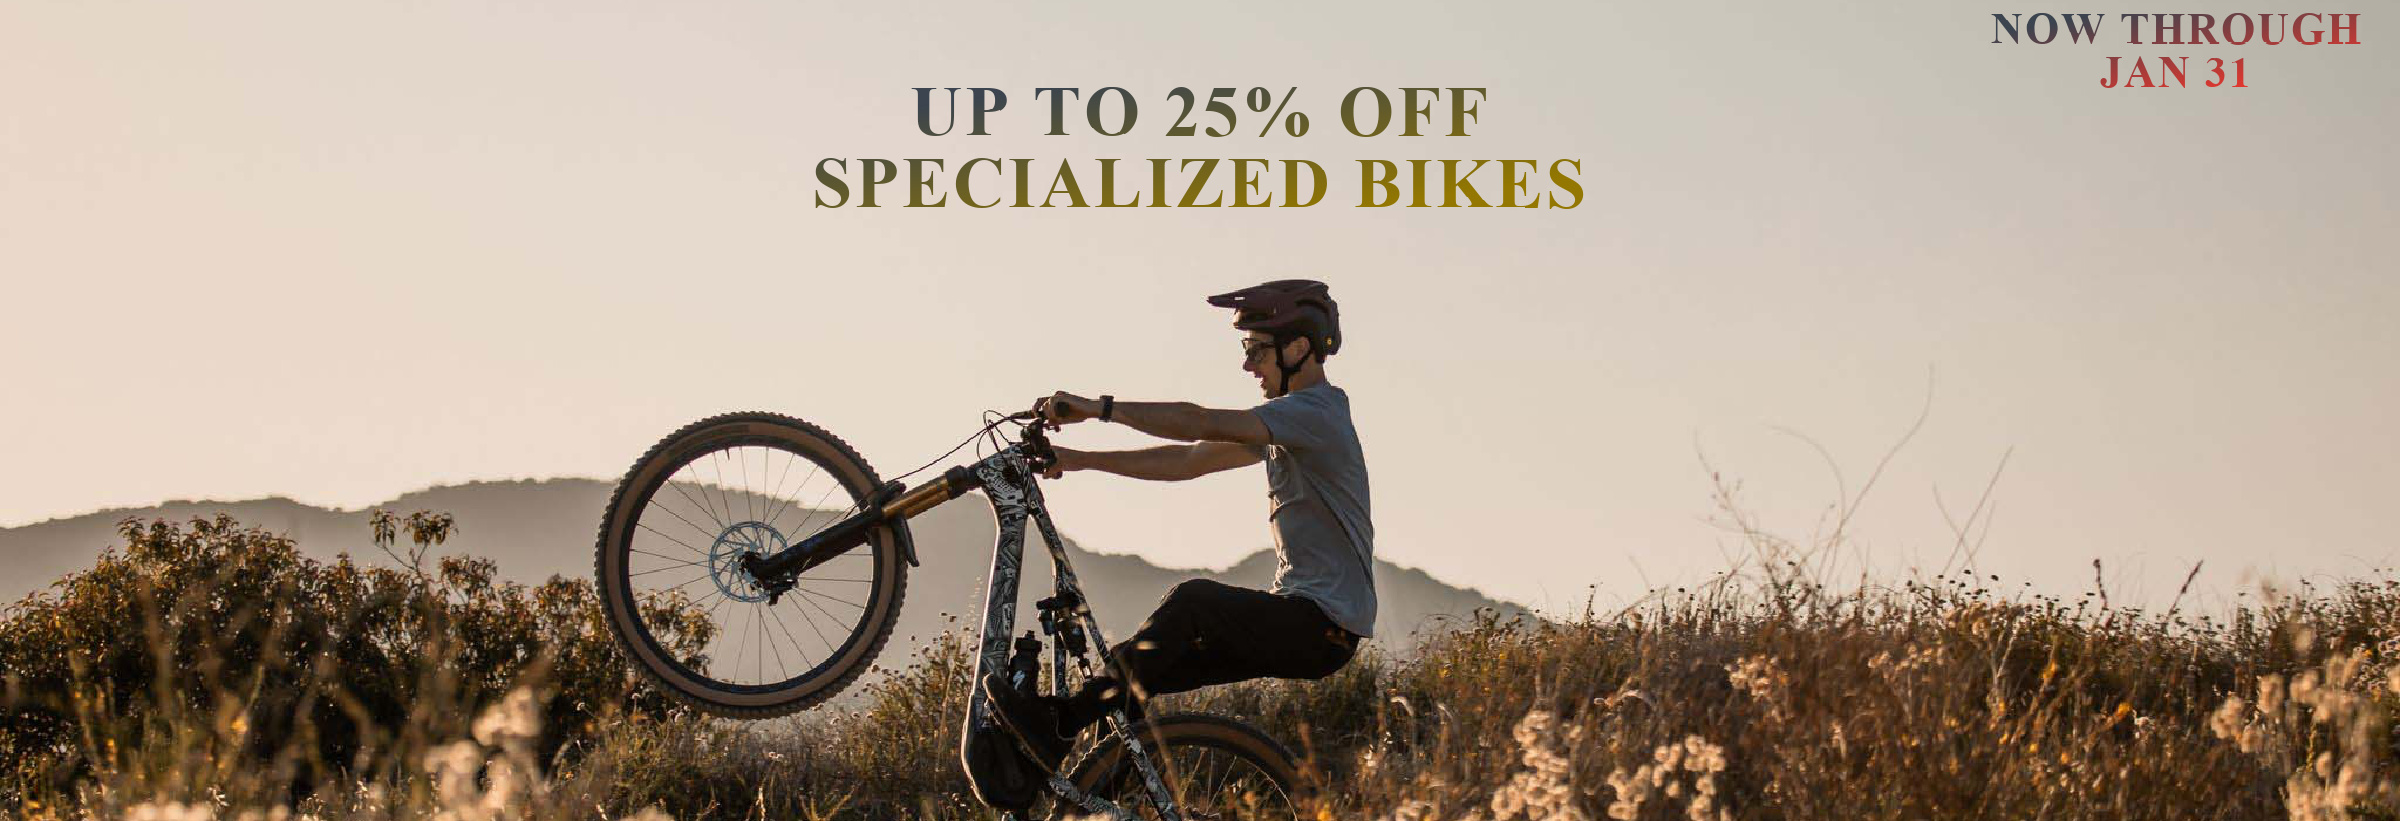 Bike Blowout Sale up to 25% off!